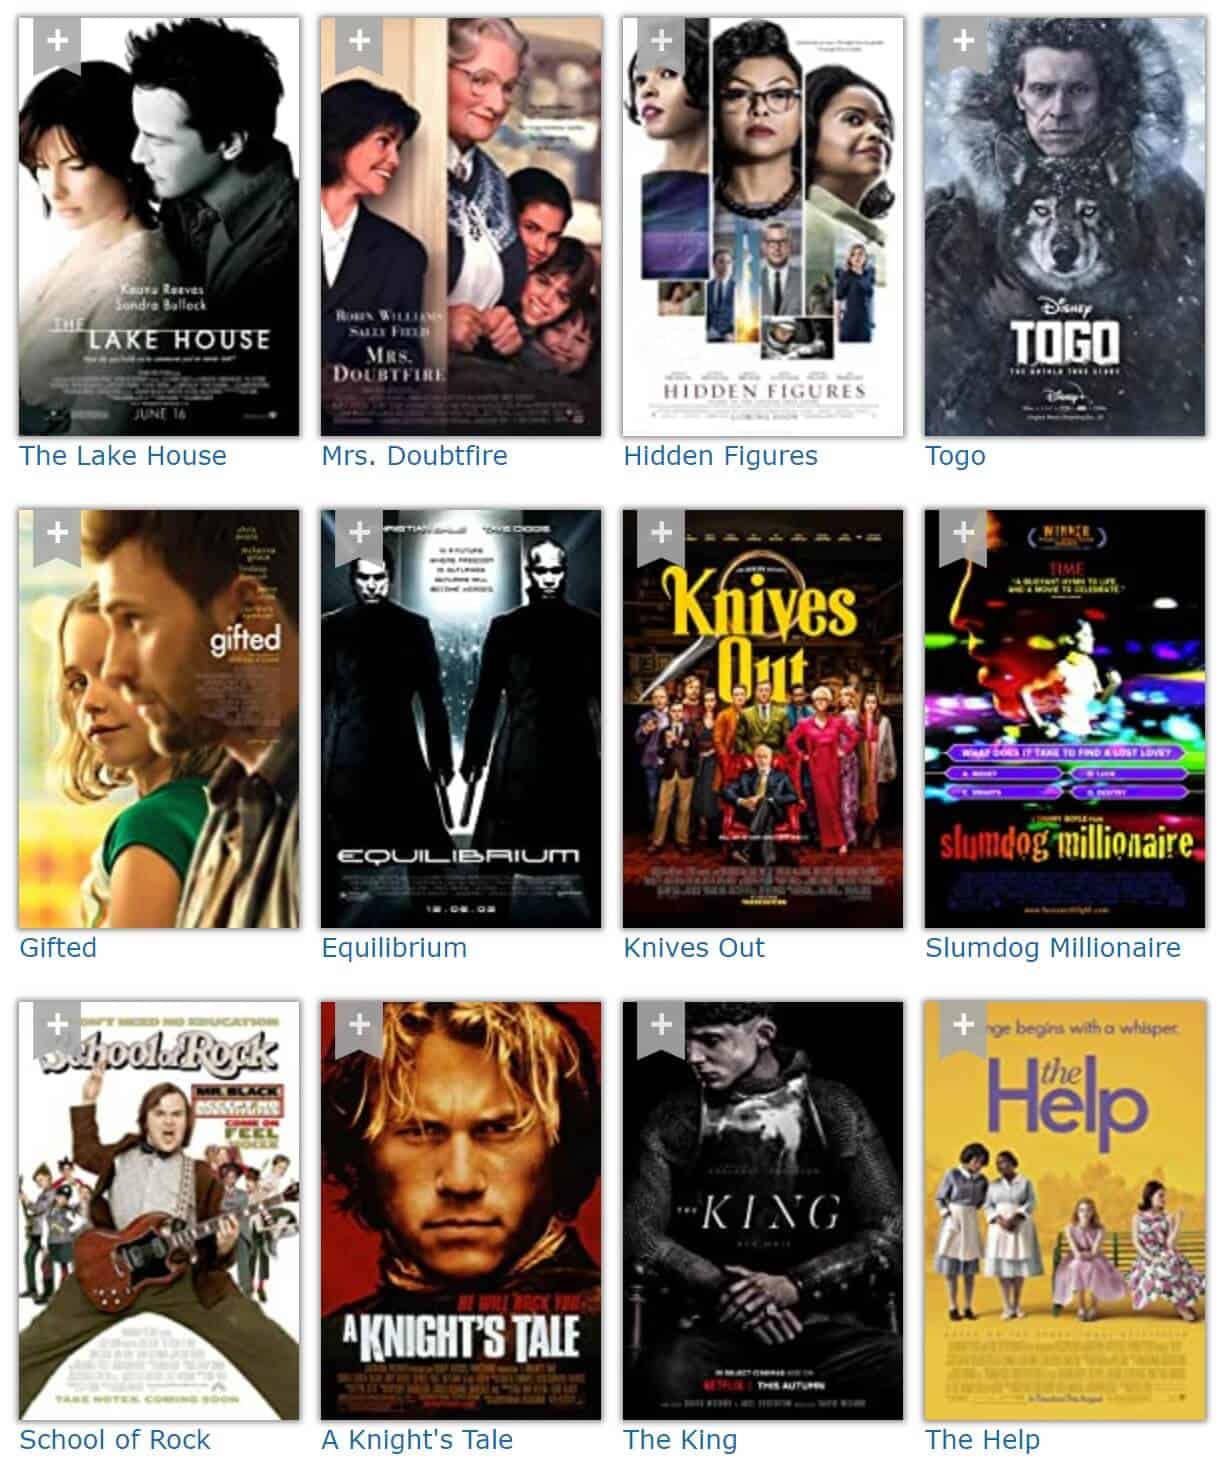 Movies we have discussed in our movie club - part 2